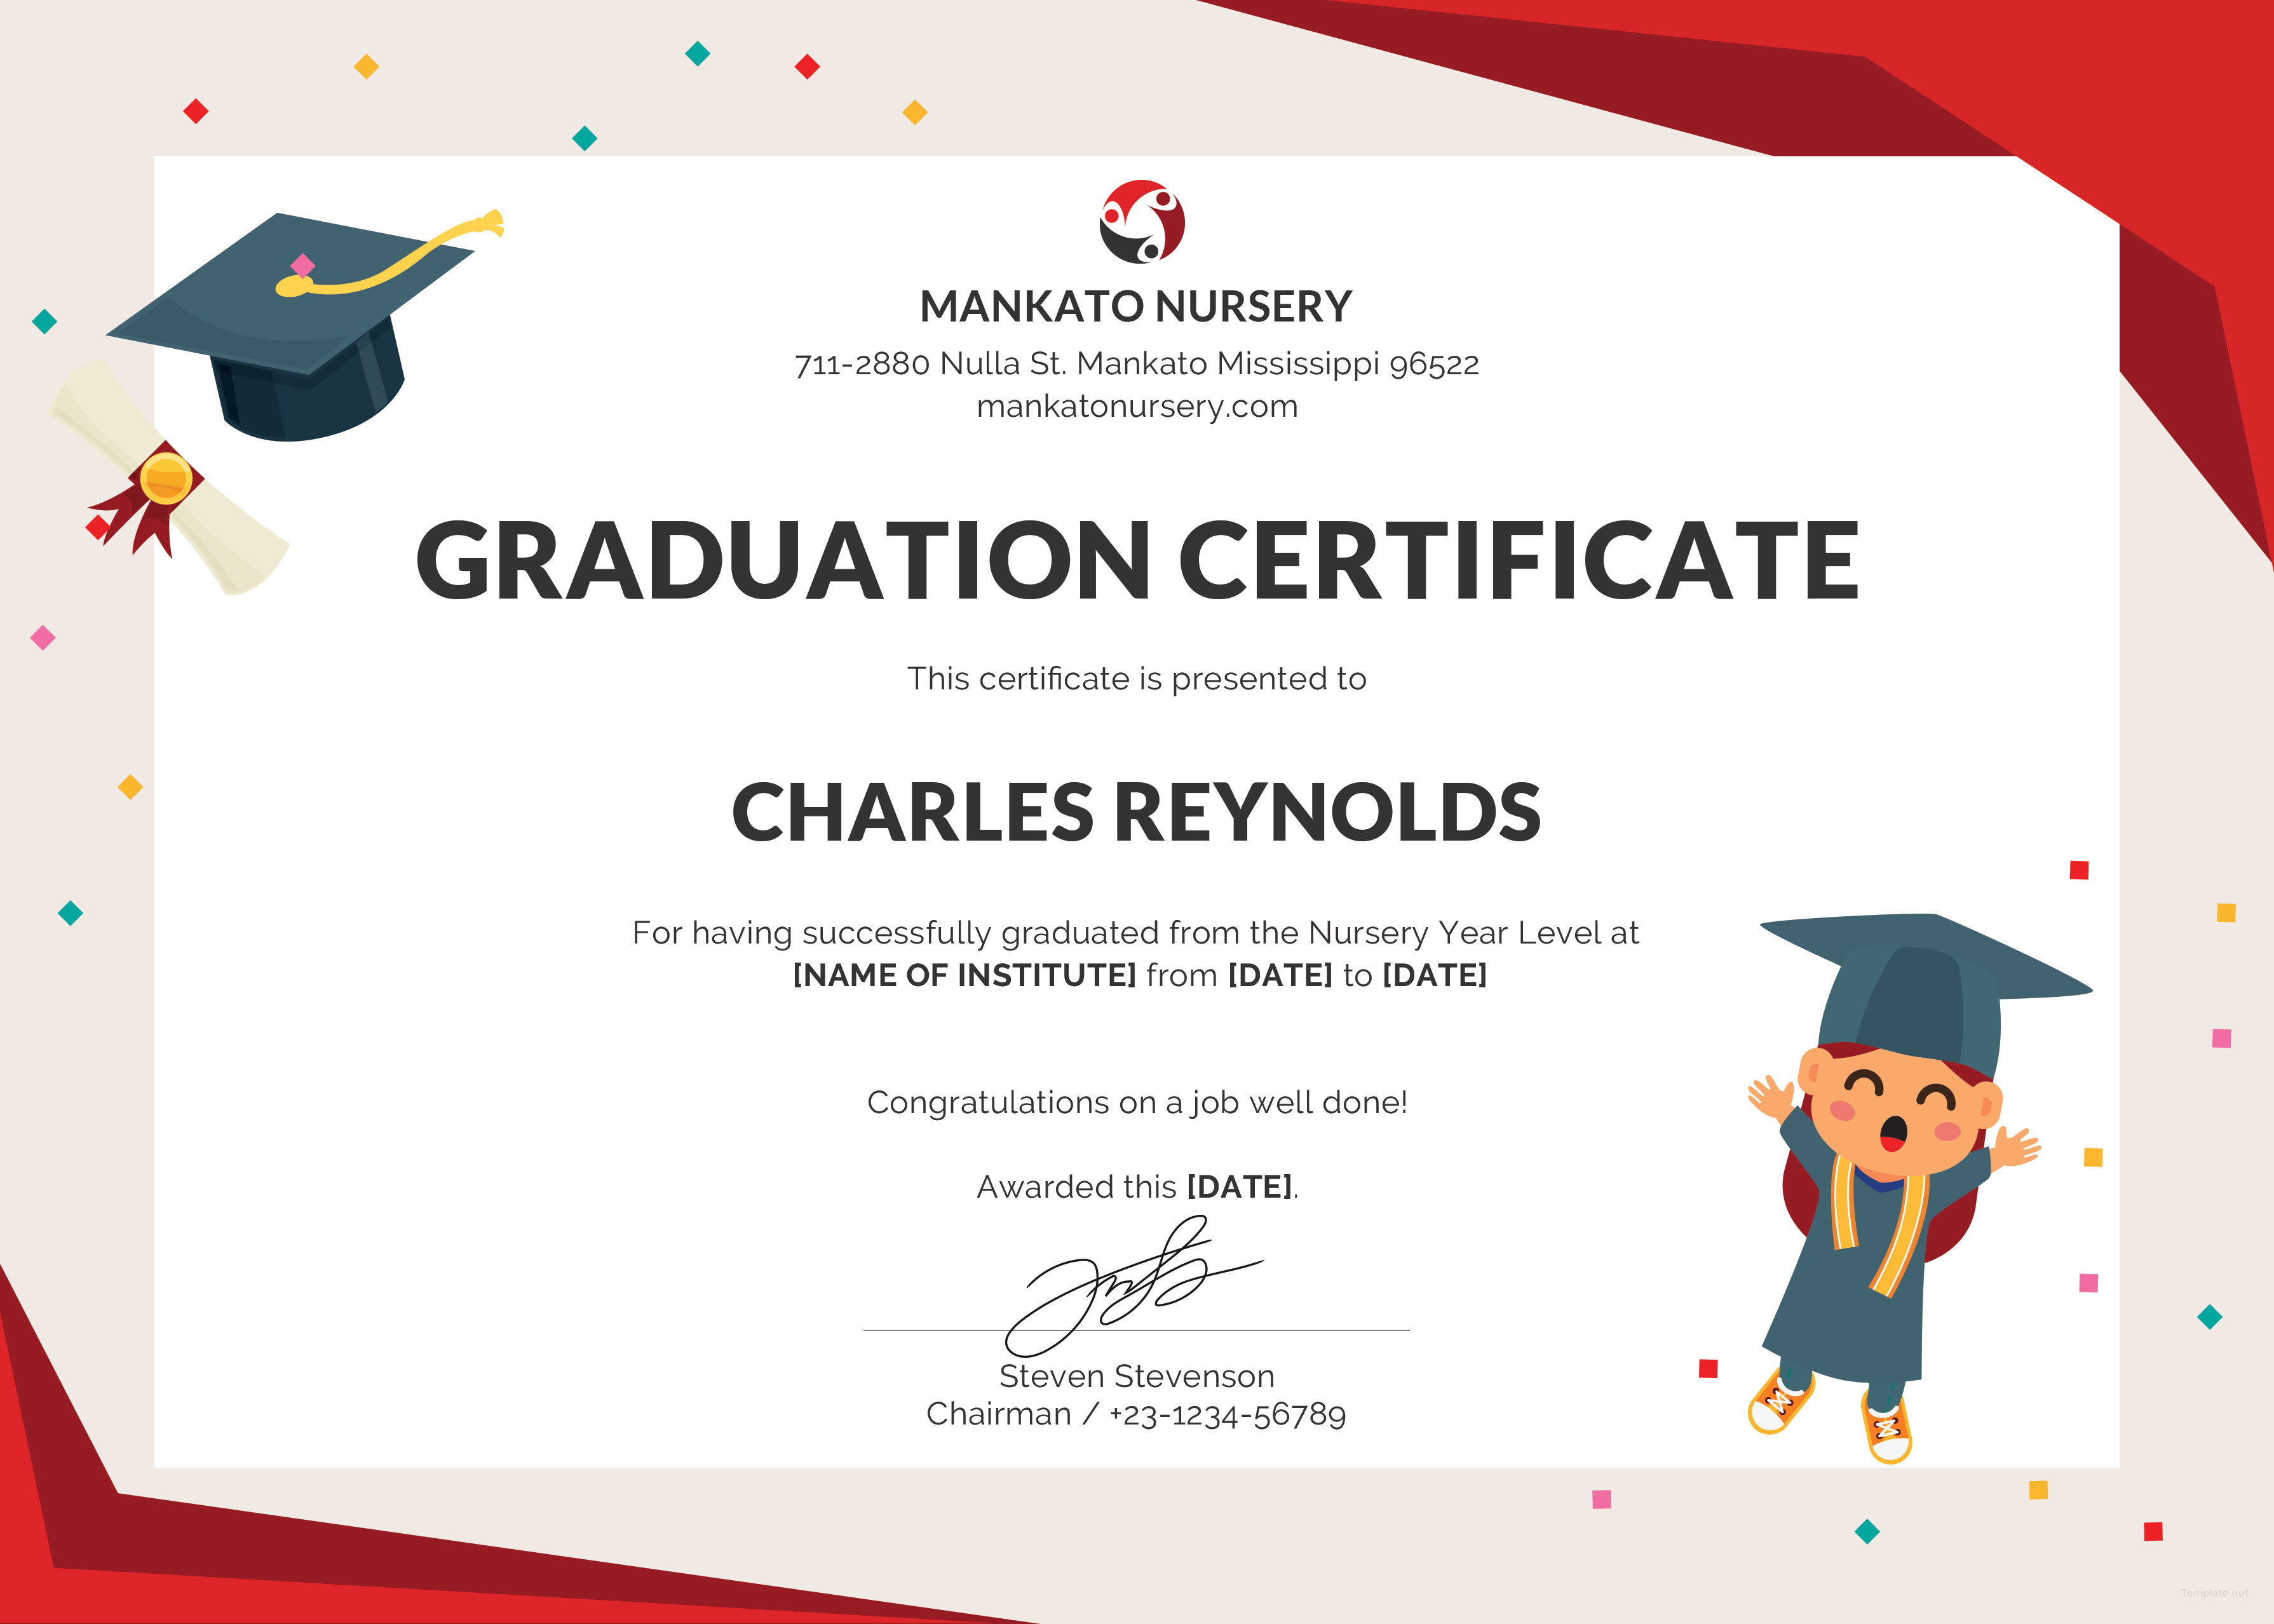 Free Nursery Graduation Certificate Template In PSD MS Word Publisher Illustrator InDesign